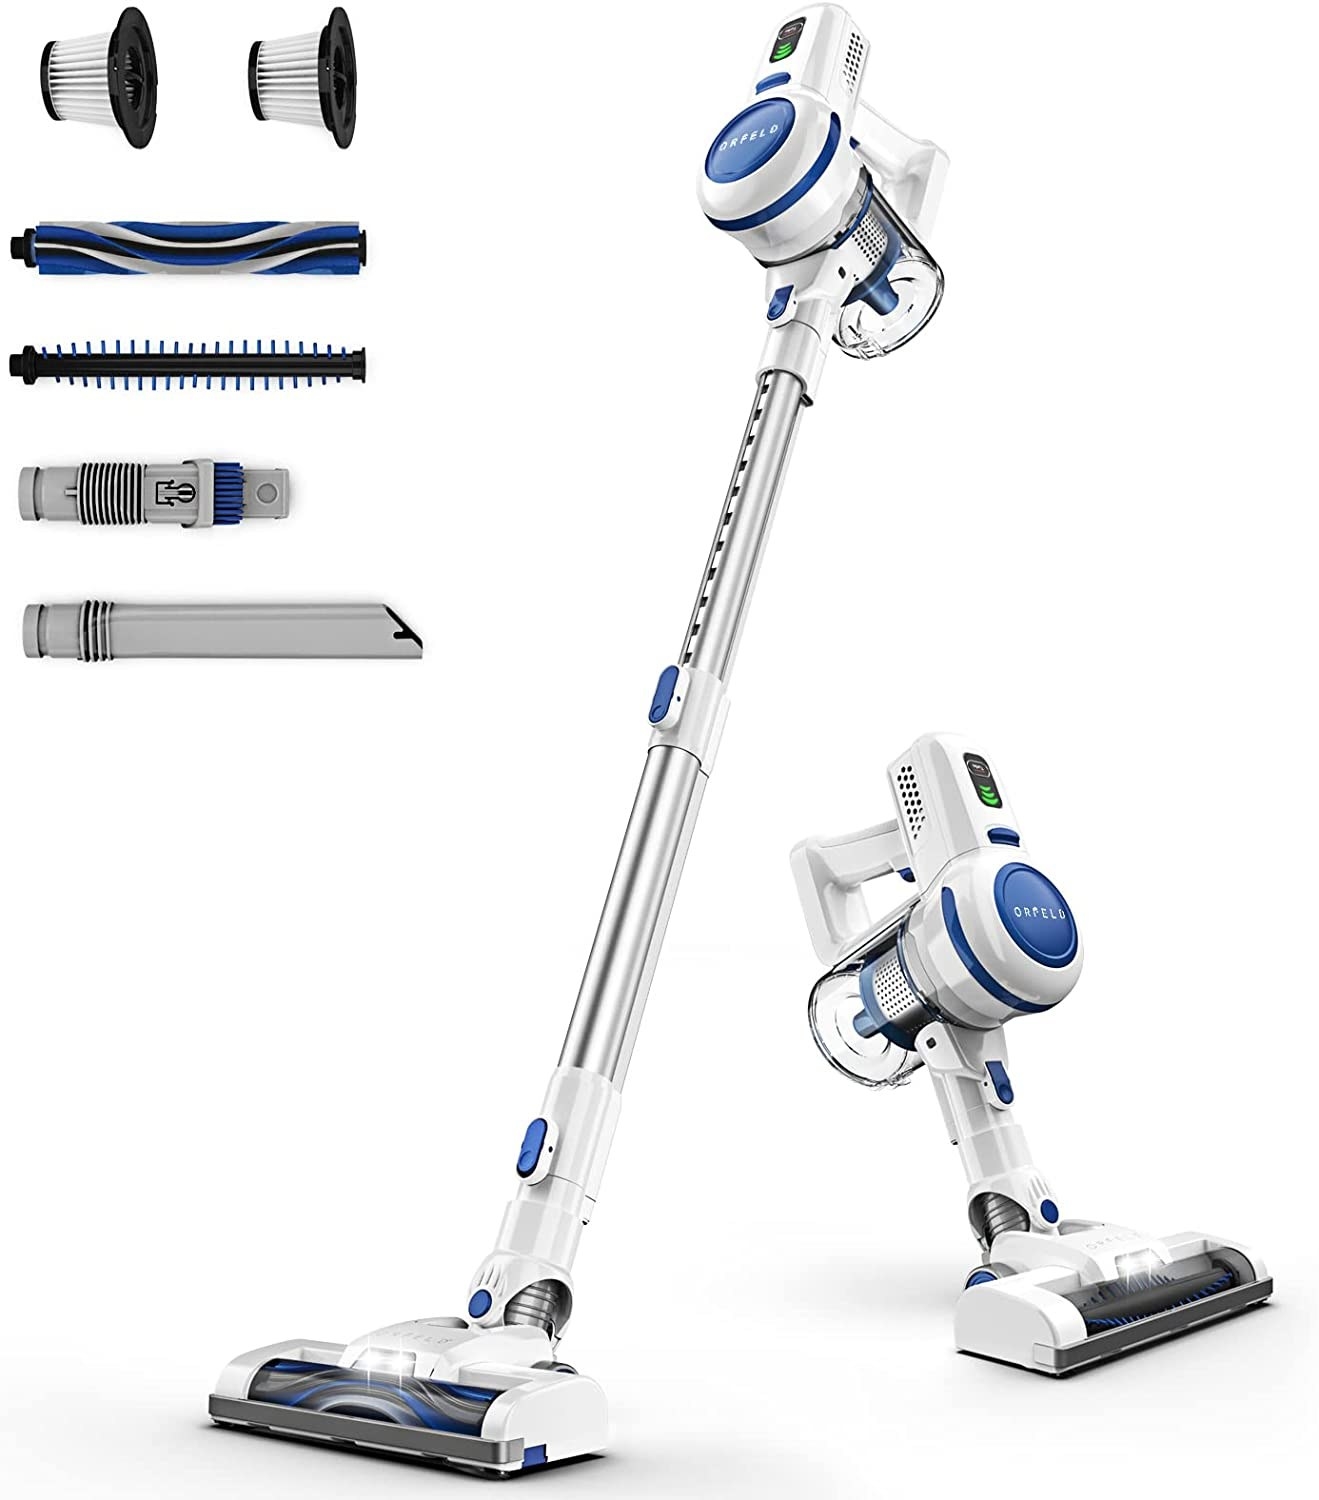 Orfeld cordless vacuum cleaner, white and blue on a white backgrounds